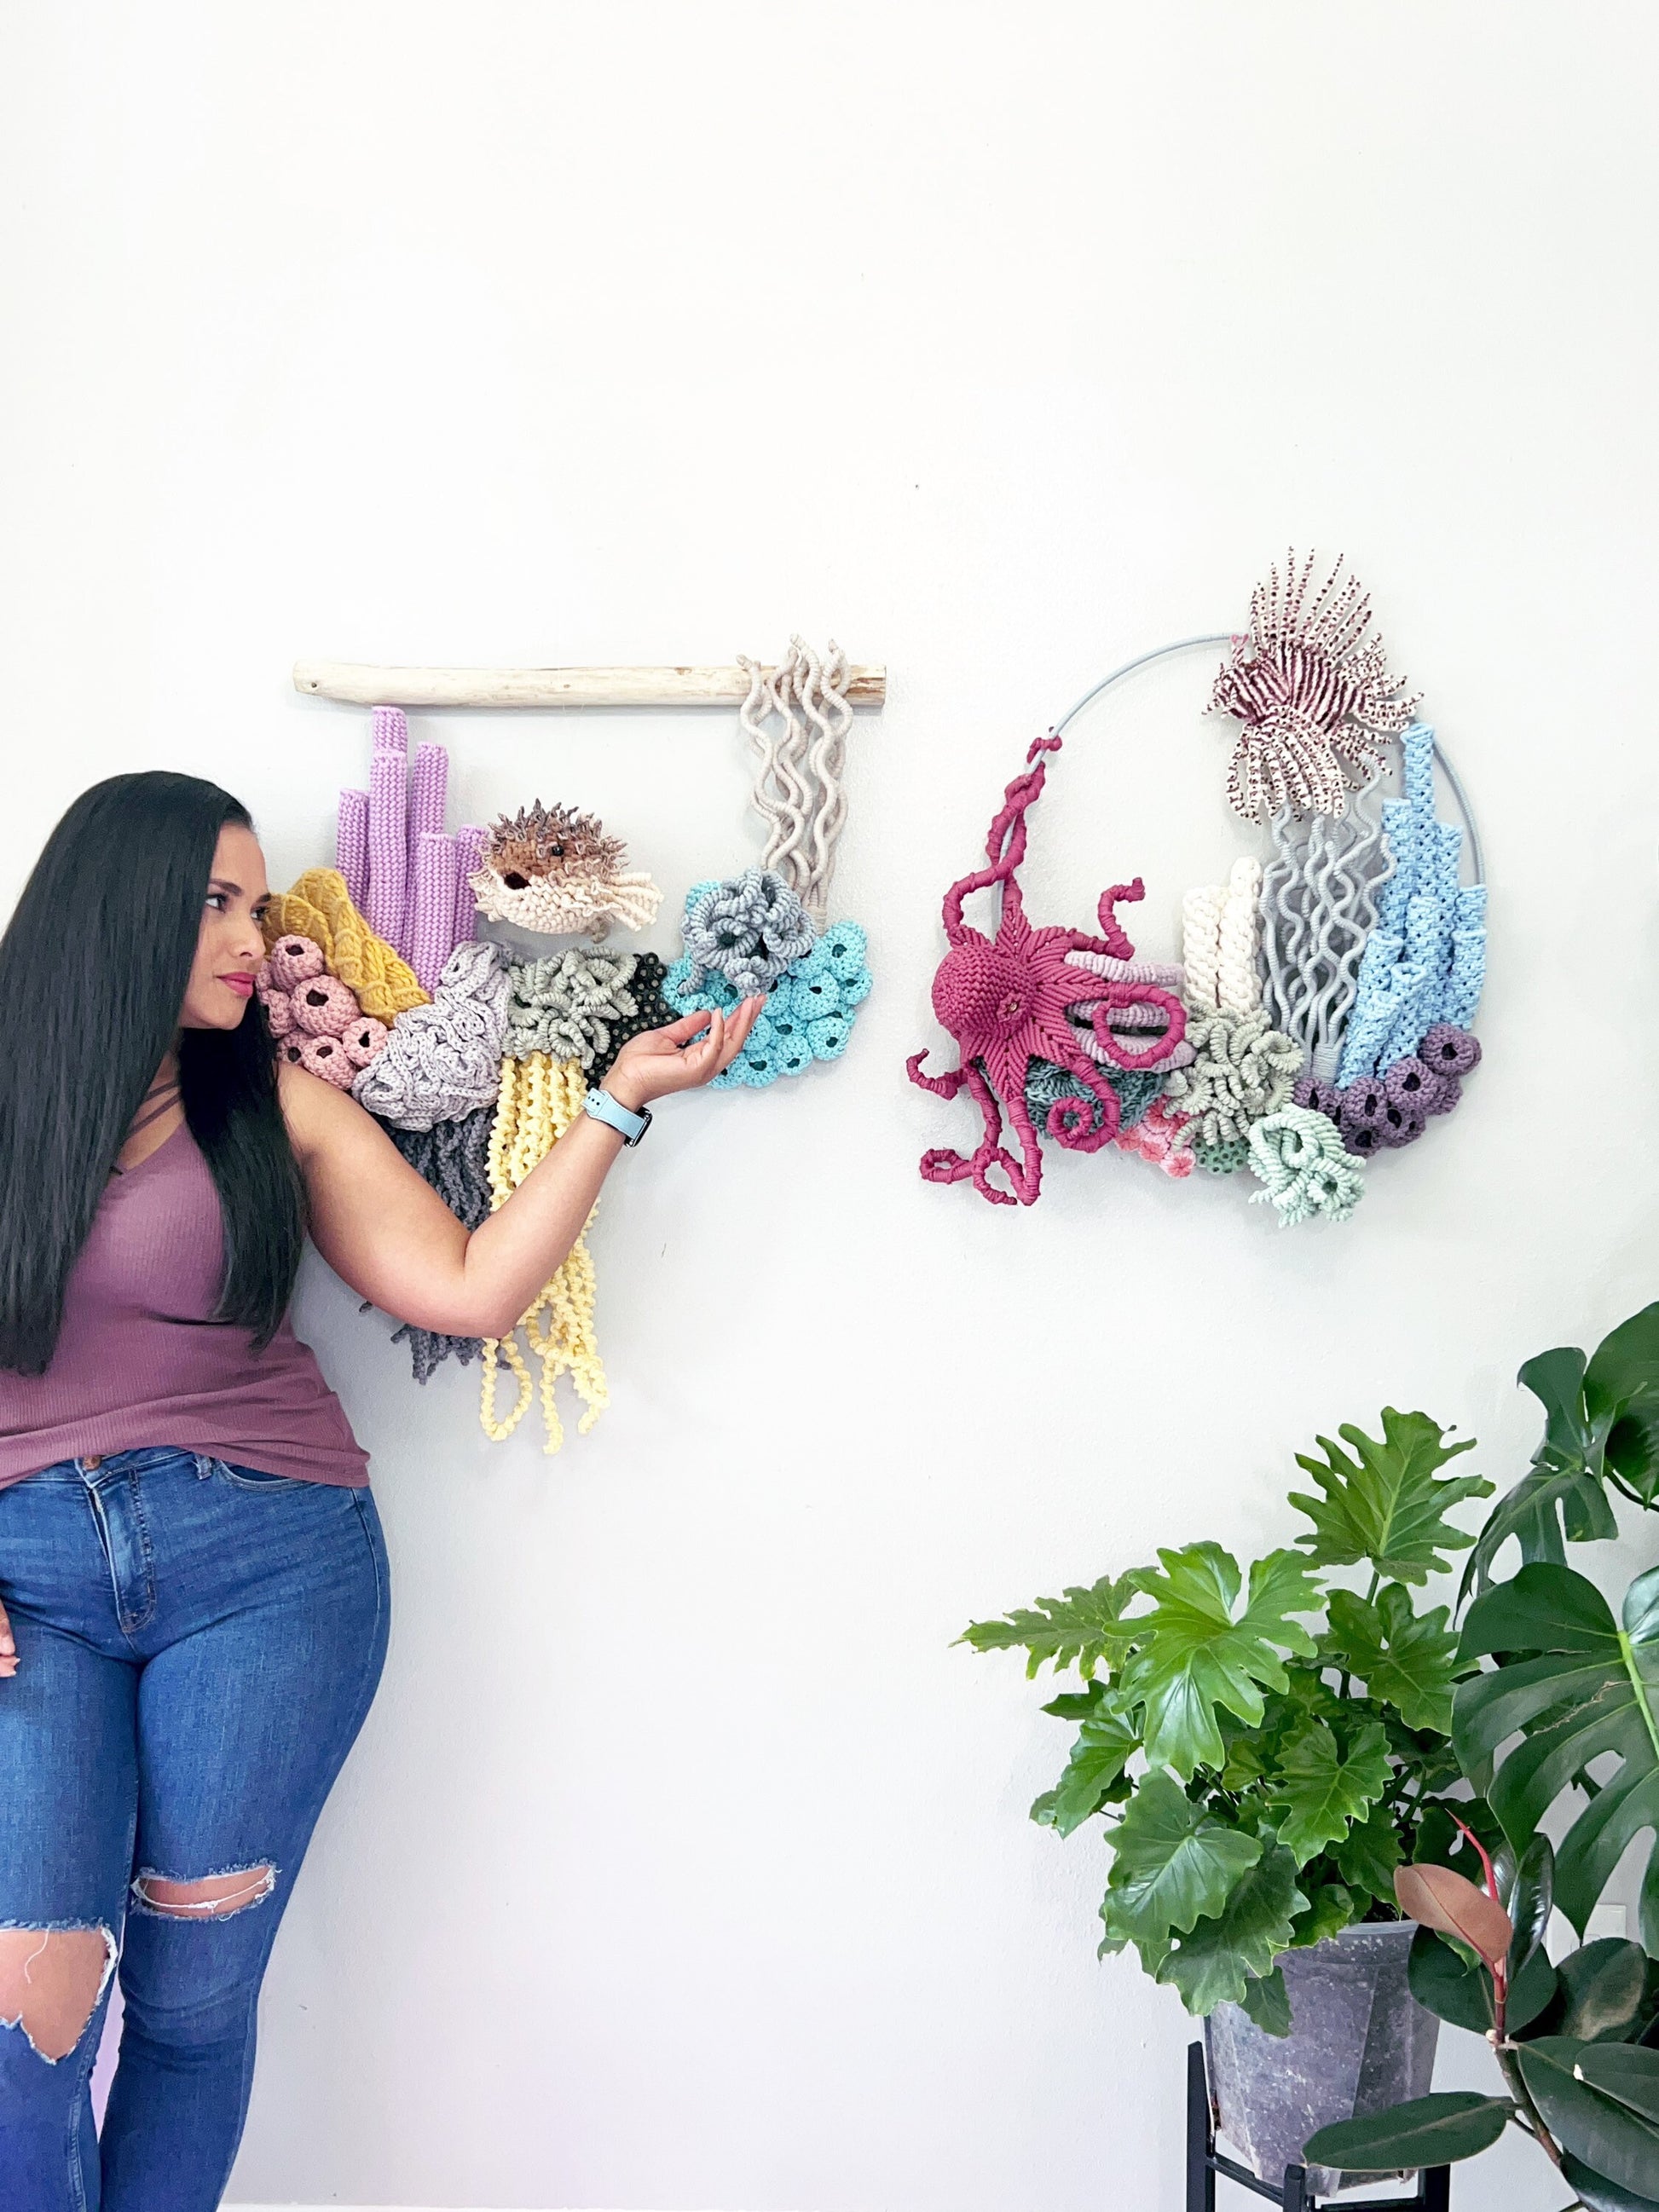 Coral Reef Wall Sculpture Create Your Own DIY 3D Coral Wall